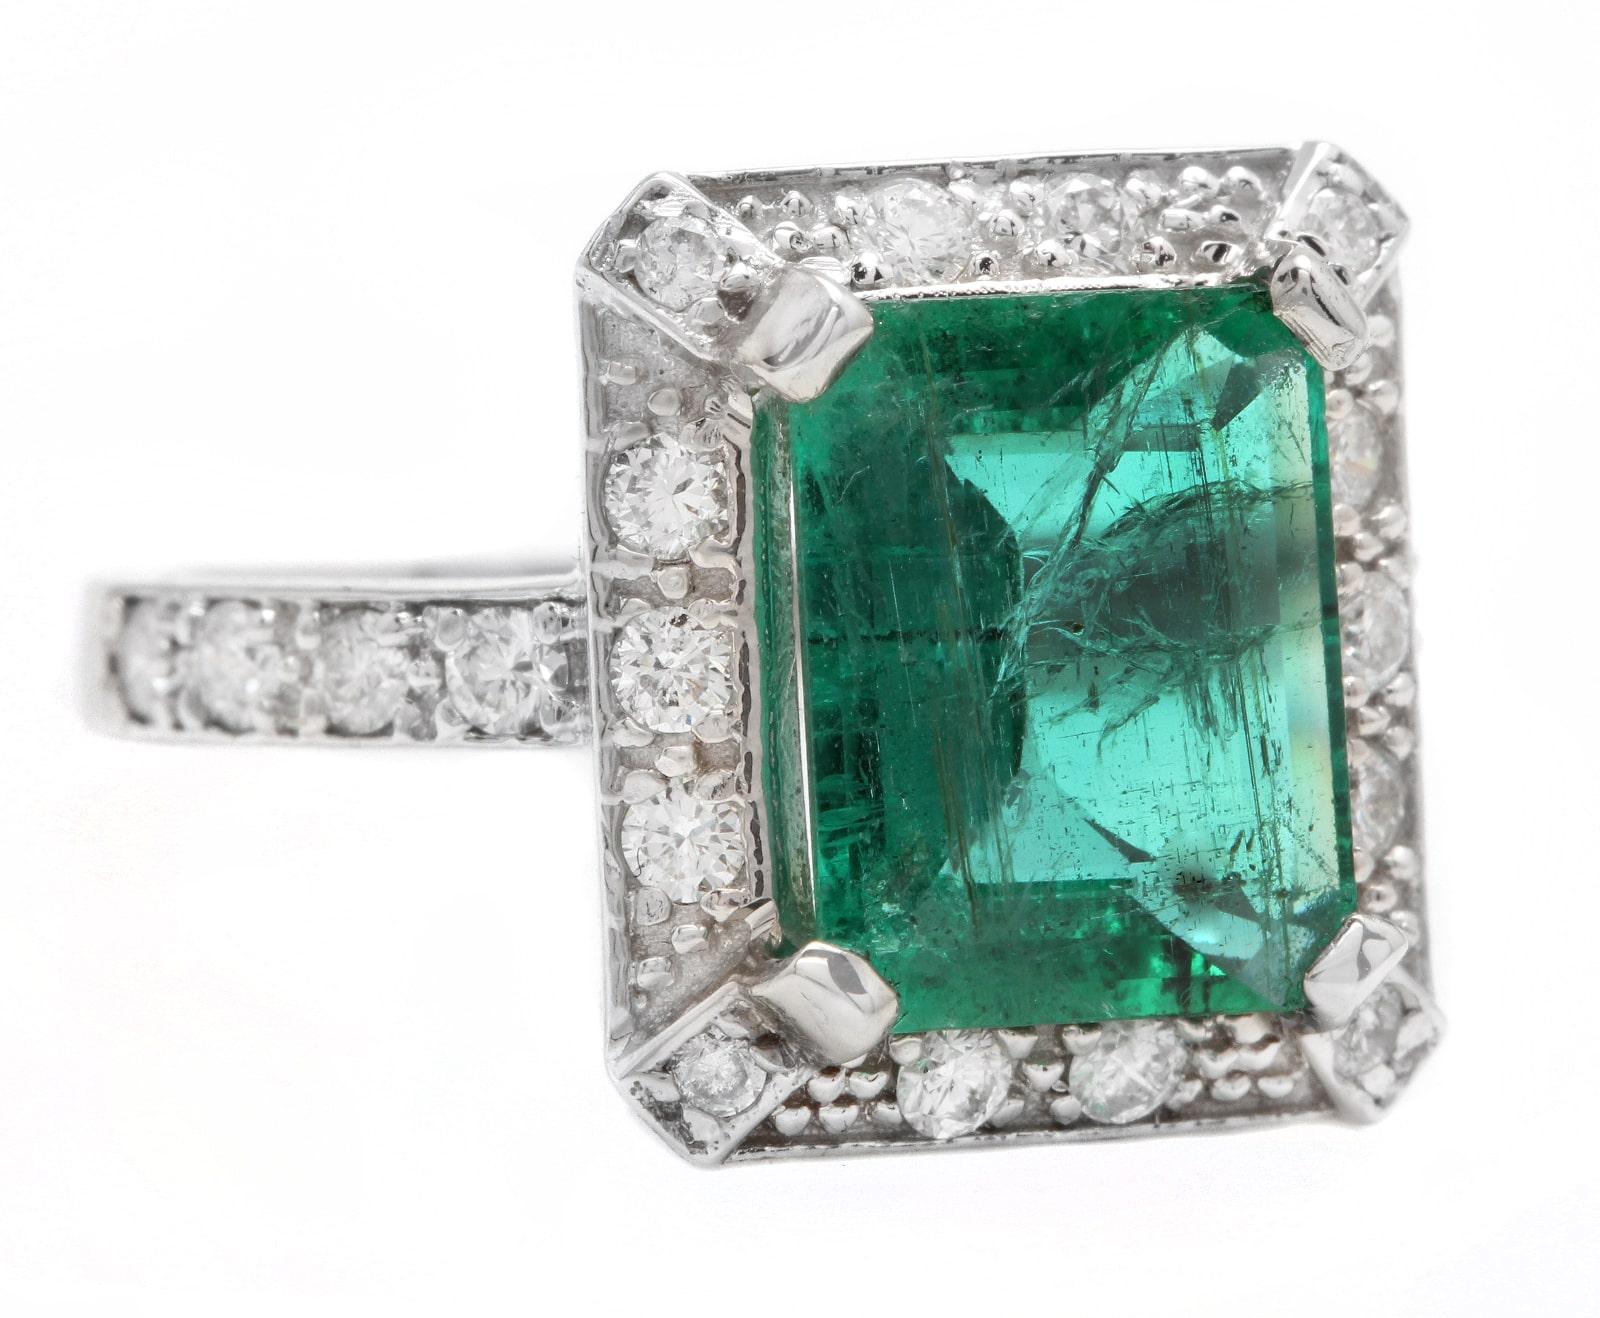 4.60 Carats Natural Emerald and Diamond 14K Solid White Gold Ring

Suggested Replacement Value: Approx. $6,000.00

Total Natural Green Emerald Weight is: Approx. 4.00 Carats (transparent)

Emerald Measures: Approx. 11 x 9mm

Emerald Treatment: